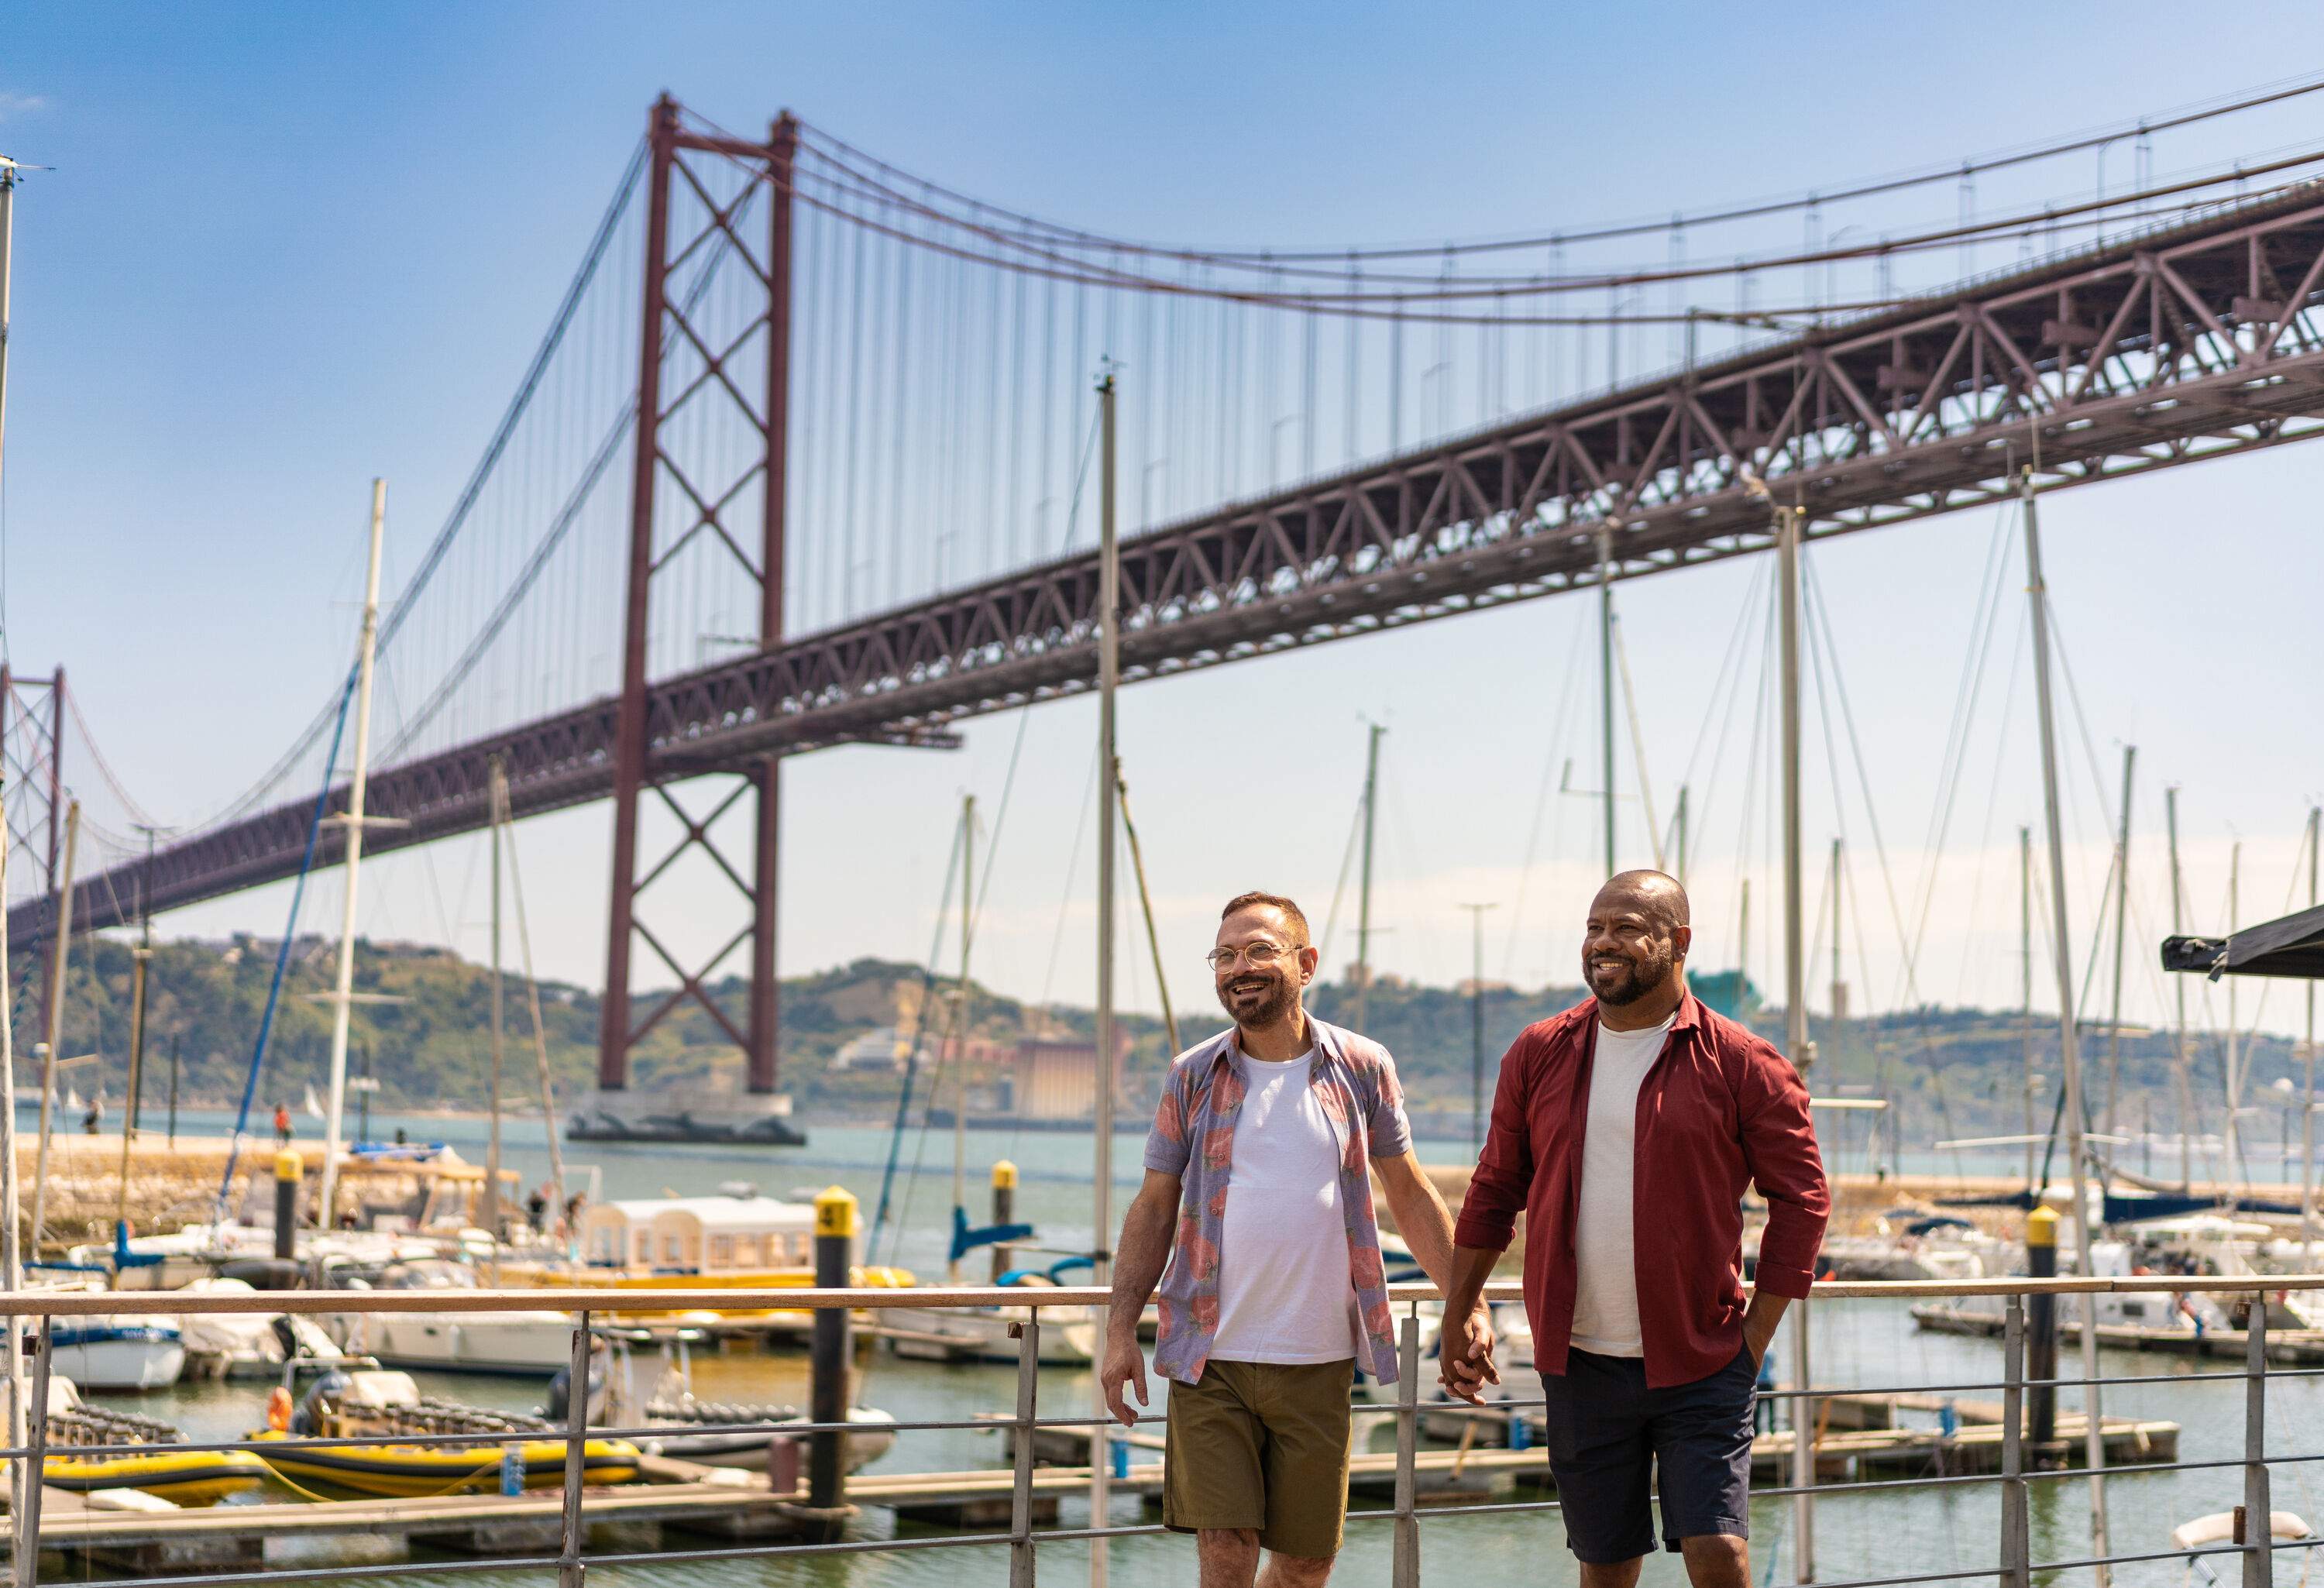 A happy gay couple walking hand in hand on the promenade against the busy harbour and an iconic bridge over the sea.